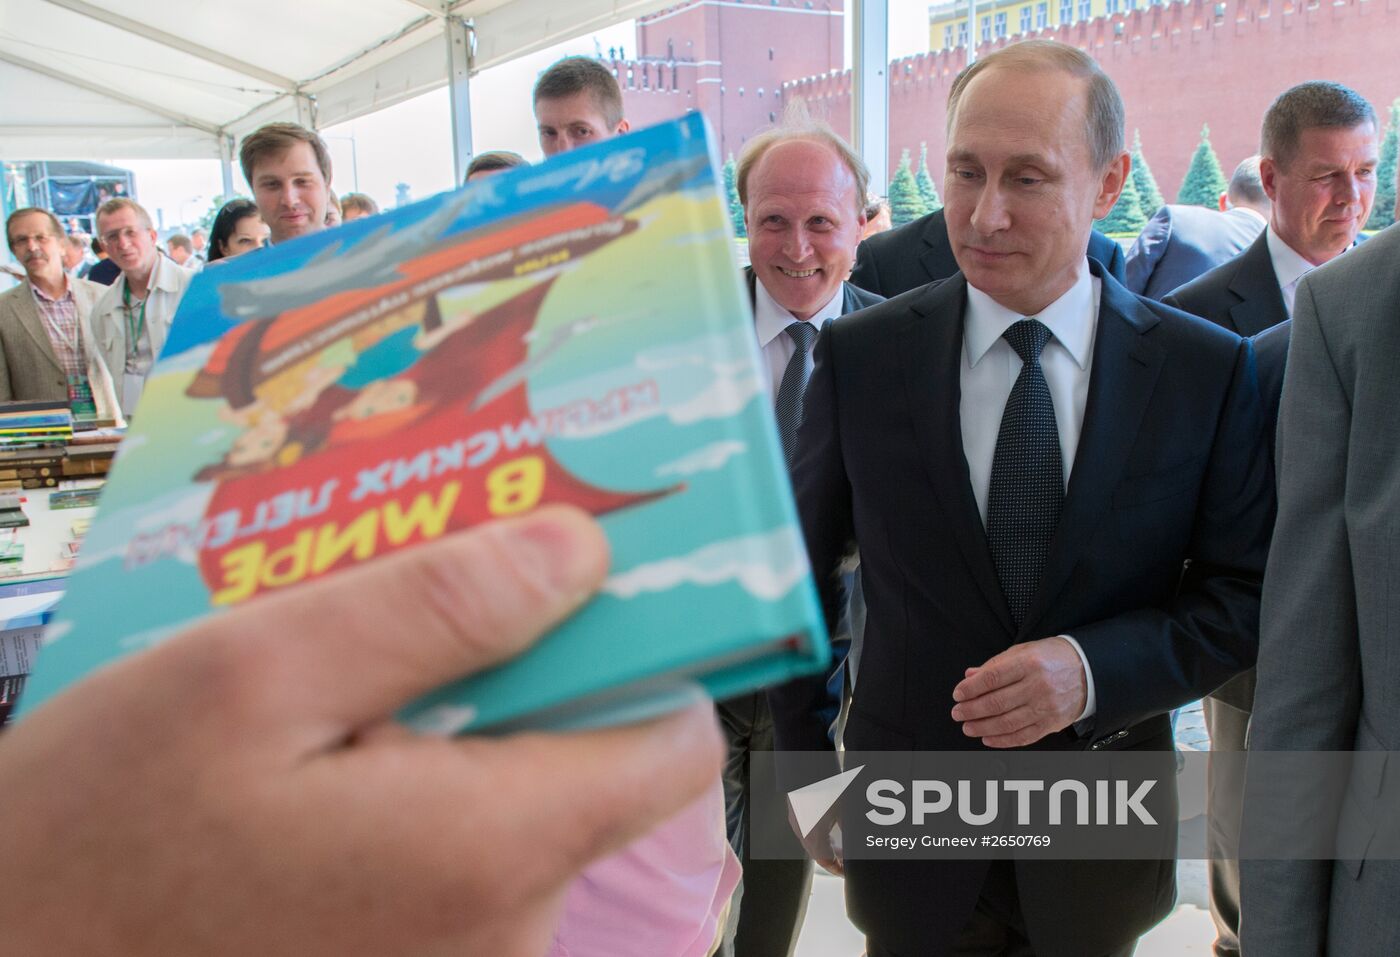 President Vladimir Putin attends Books of Russia Festival on Moscow's Red Square